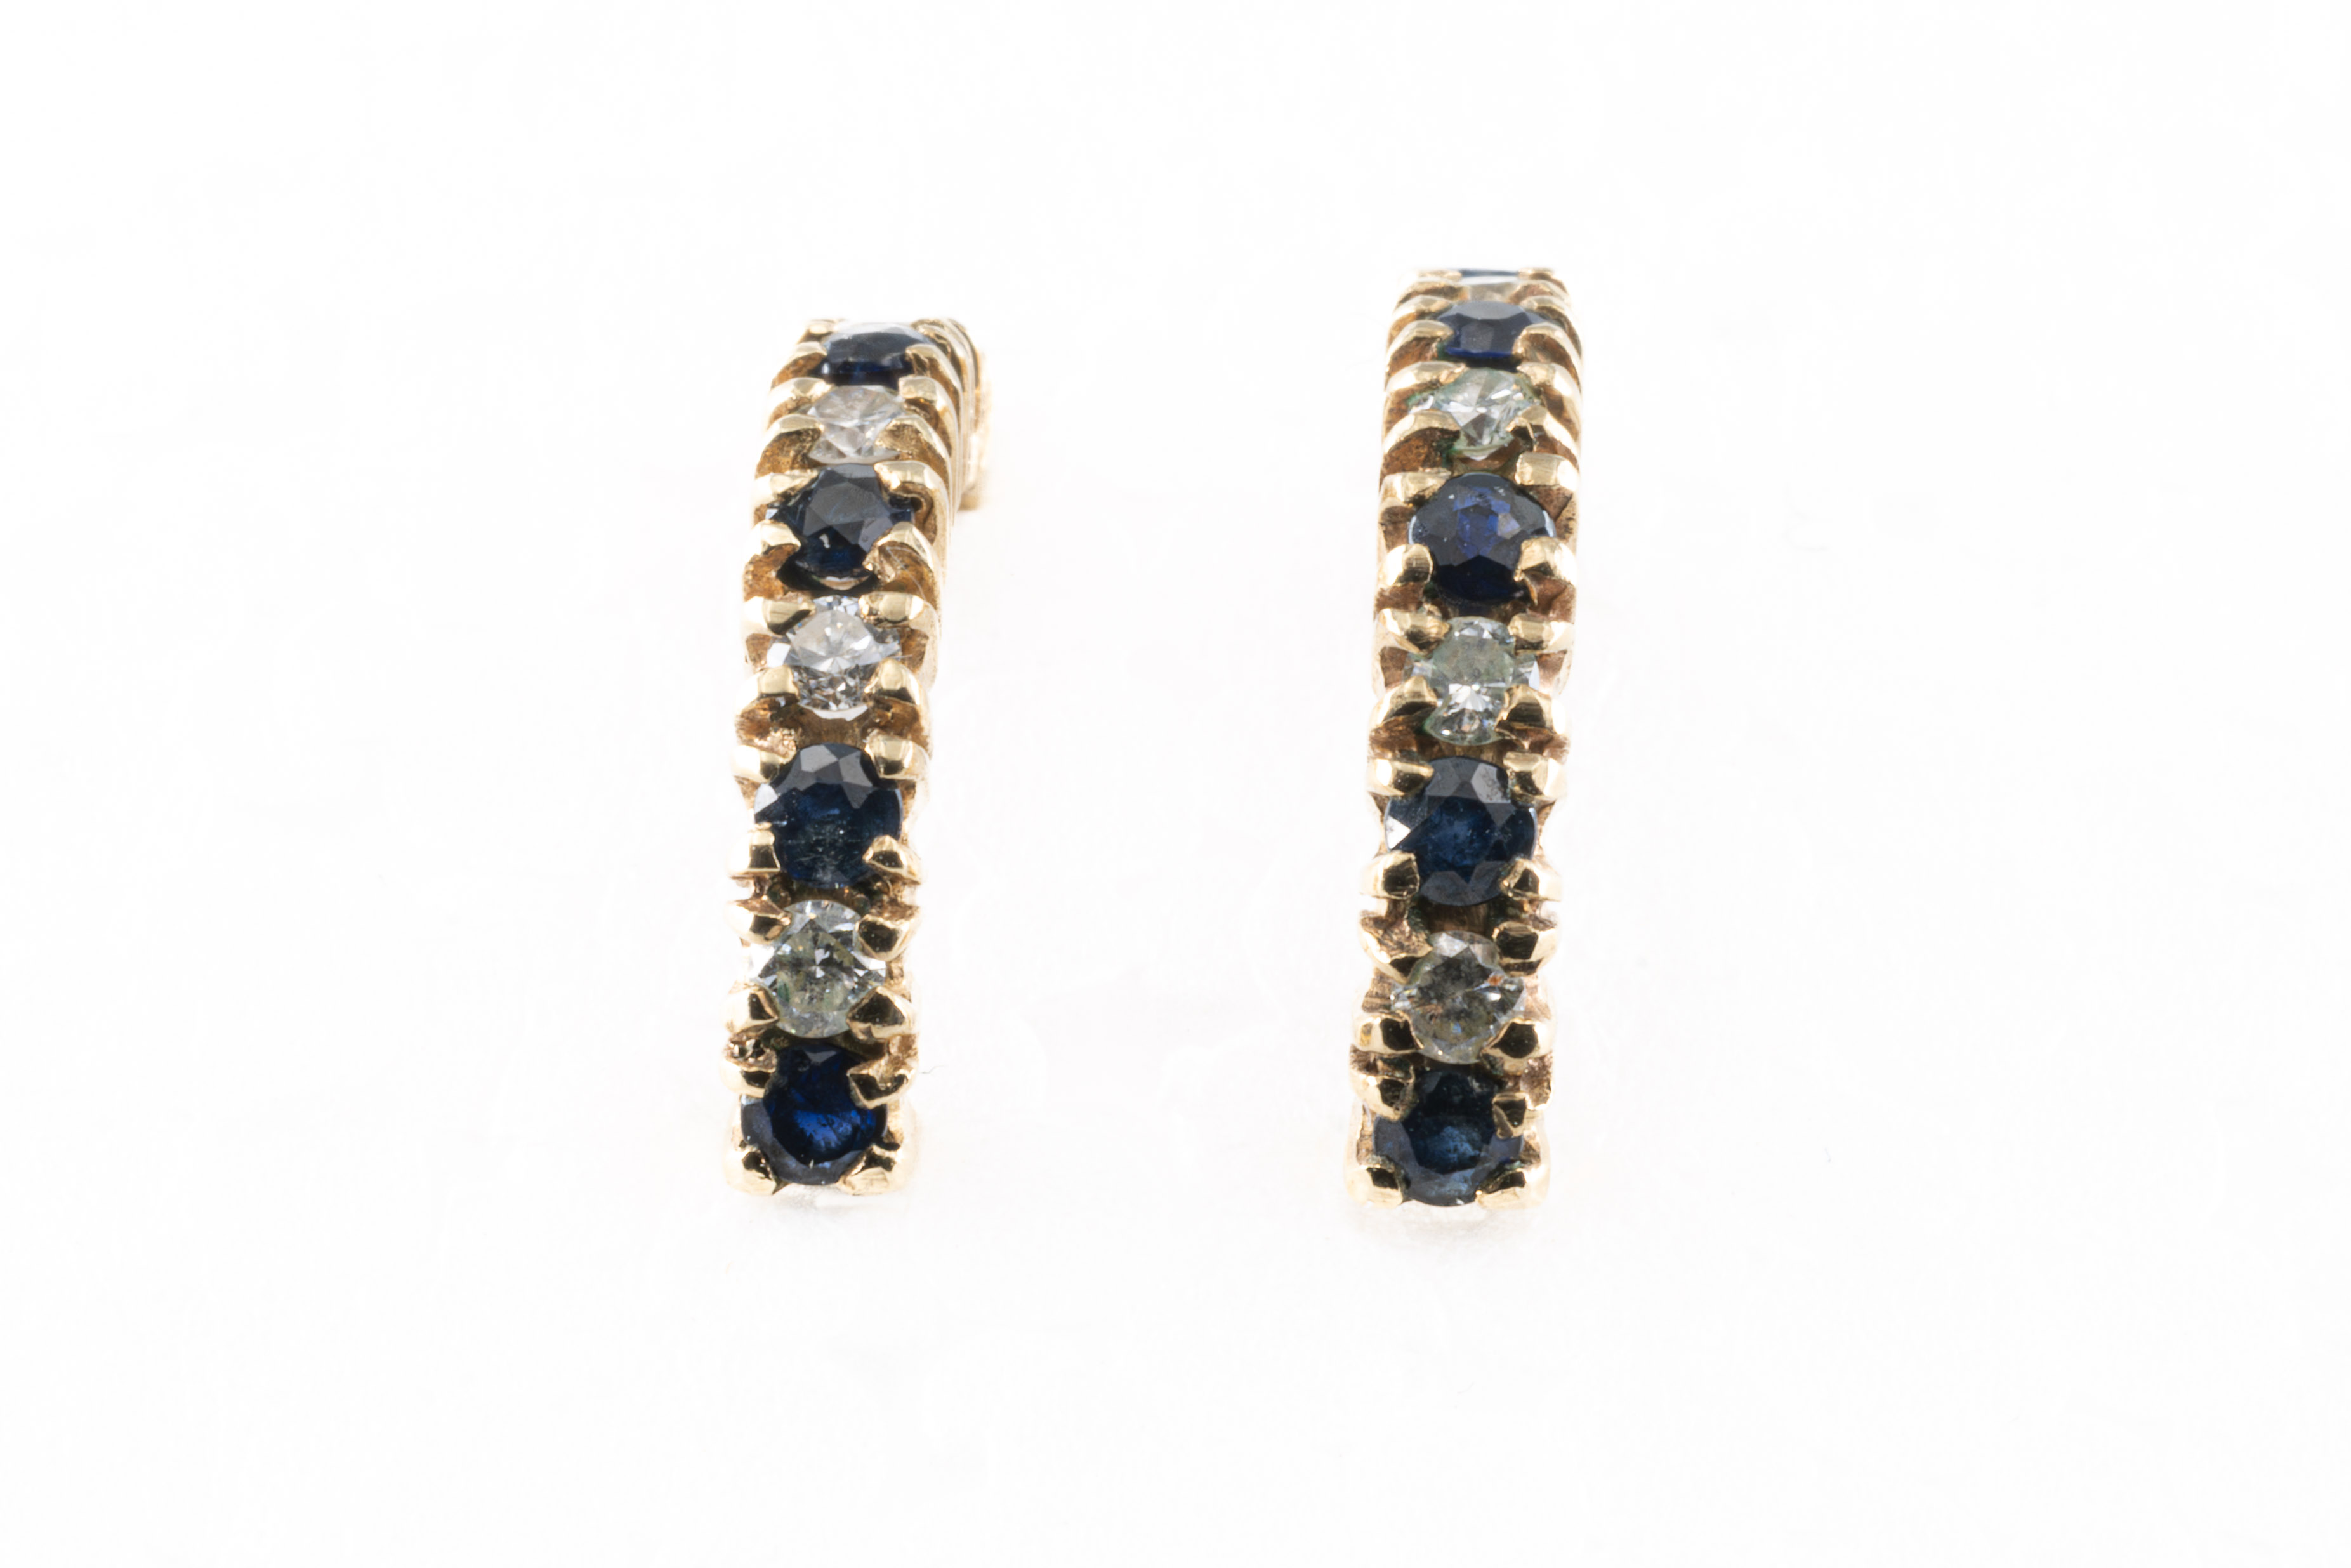 A pair of 9ct gold sapphire and diamond earrings